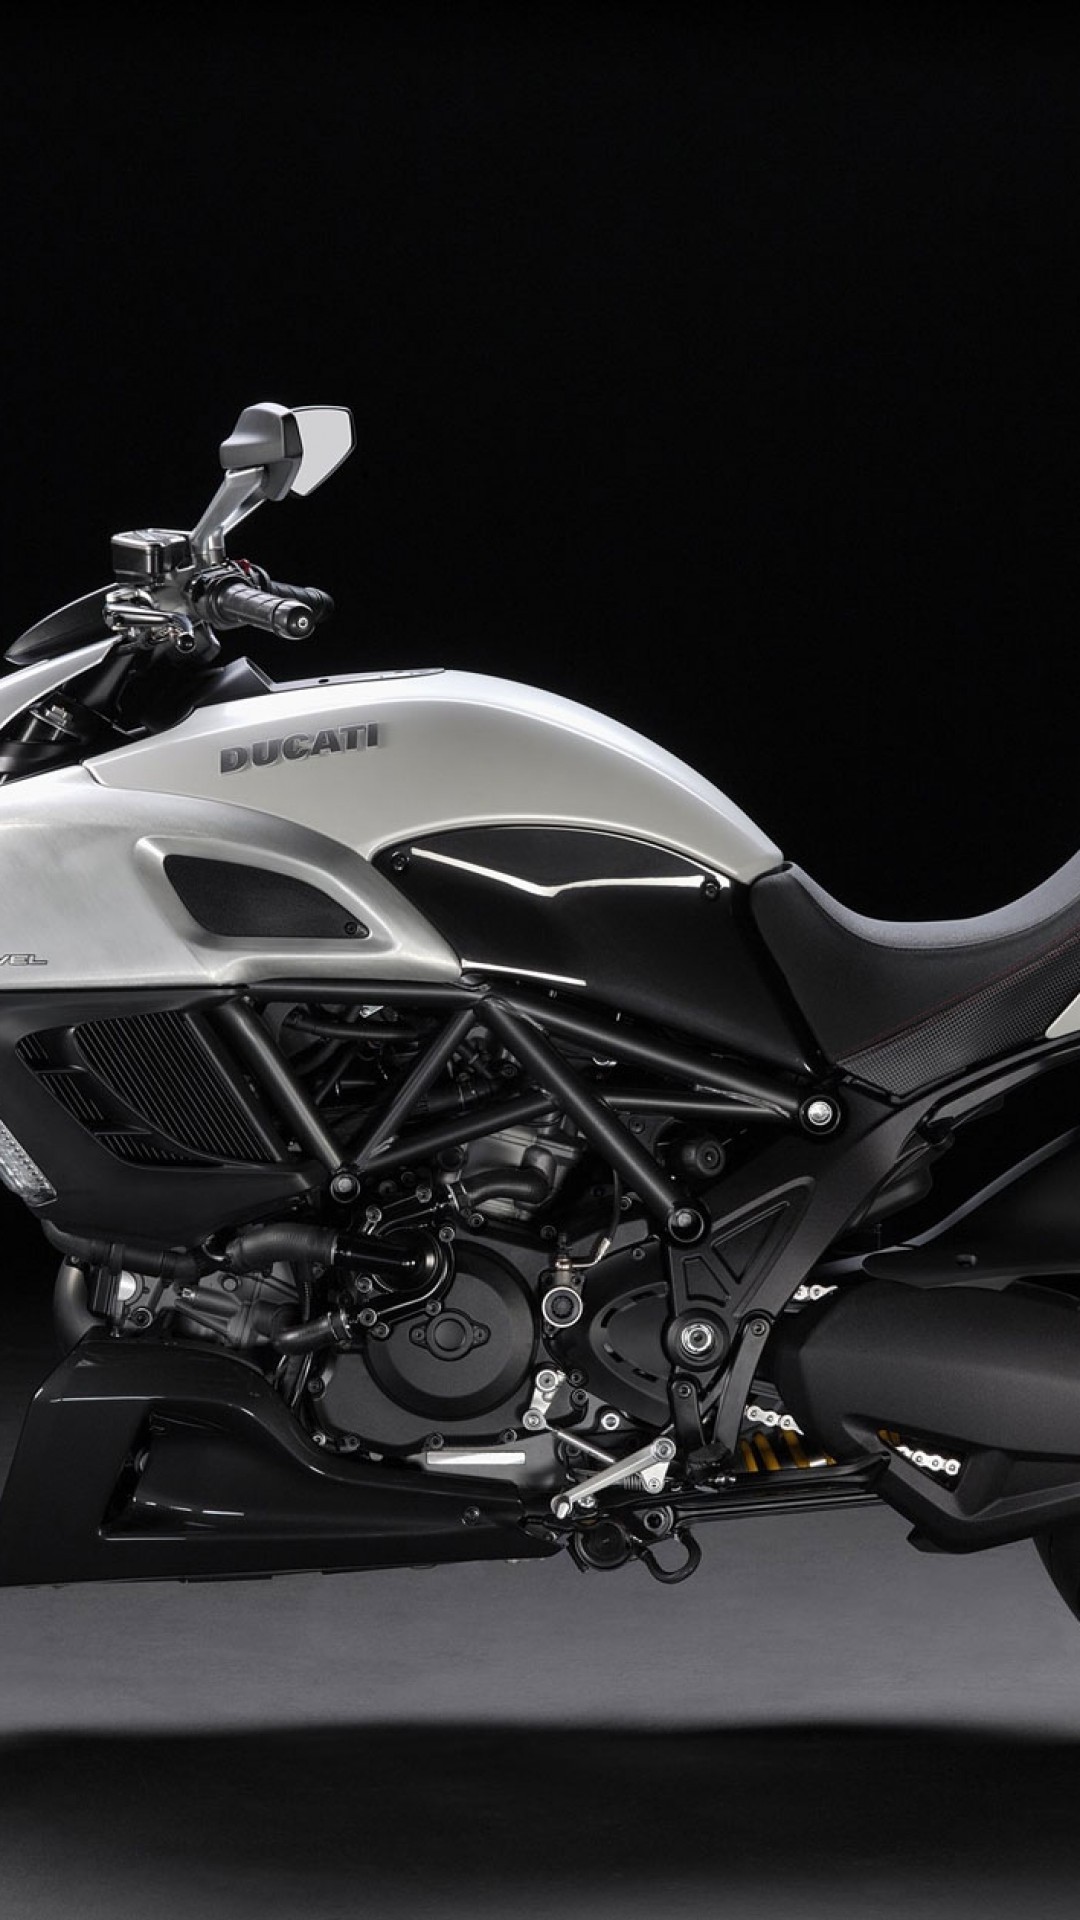 Ducati Diavel, Silver, Side View, Motorcycle - Ducati Diavel 2012 Wit - HD Wallpaper 